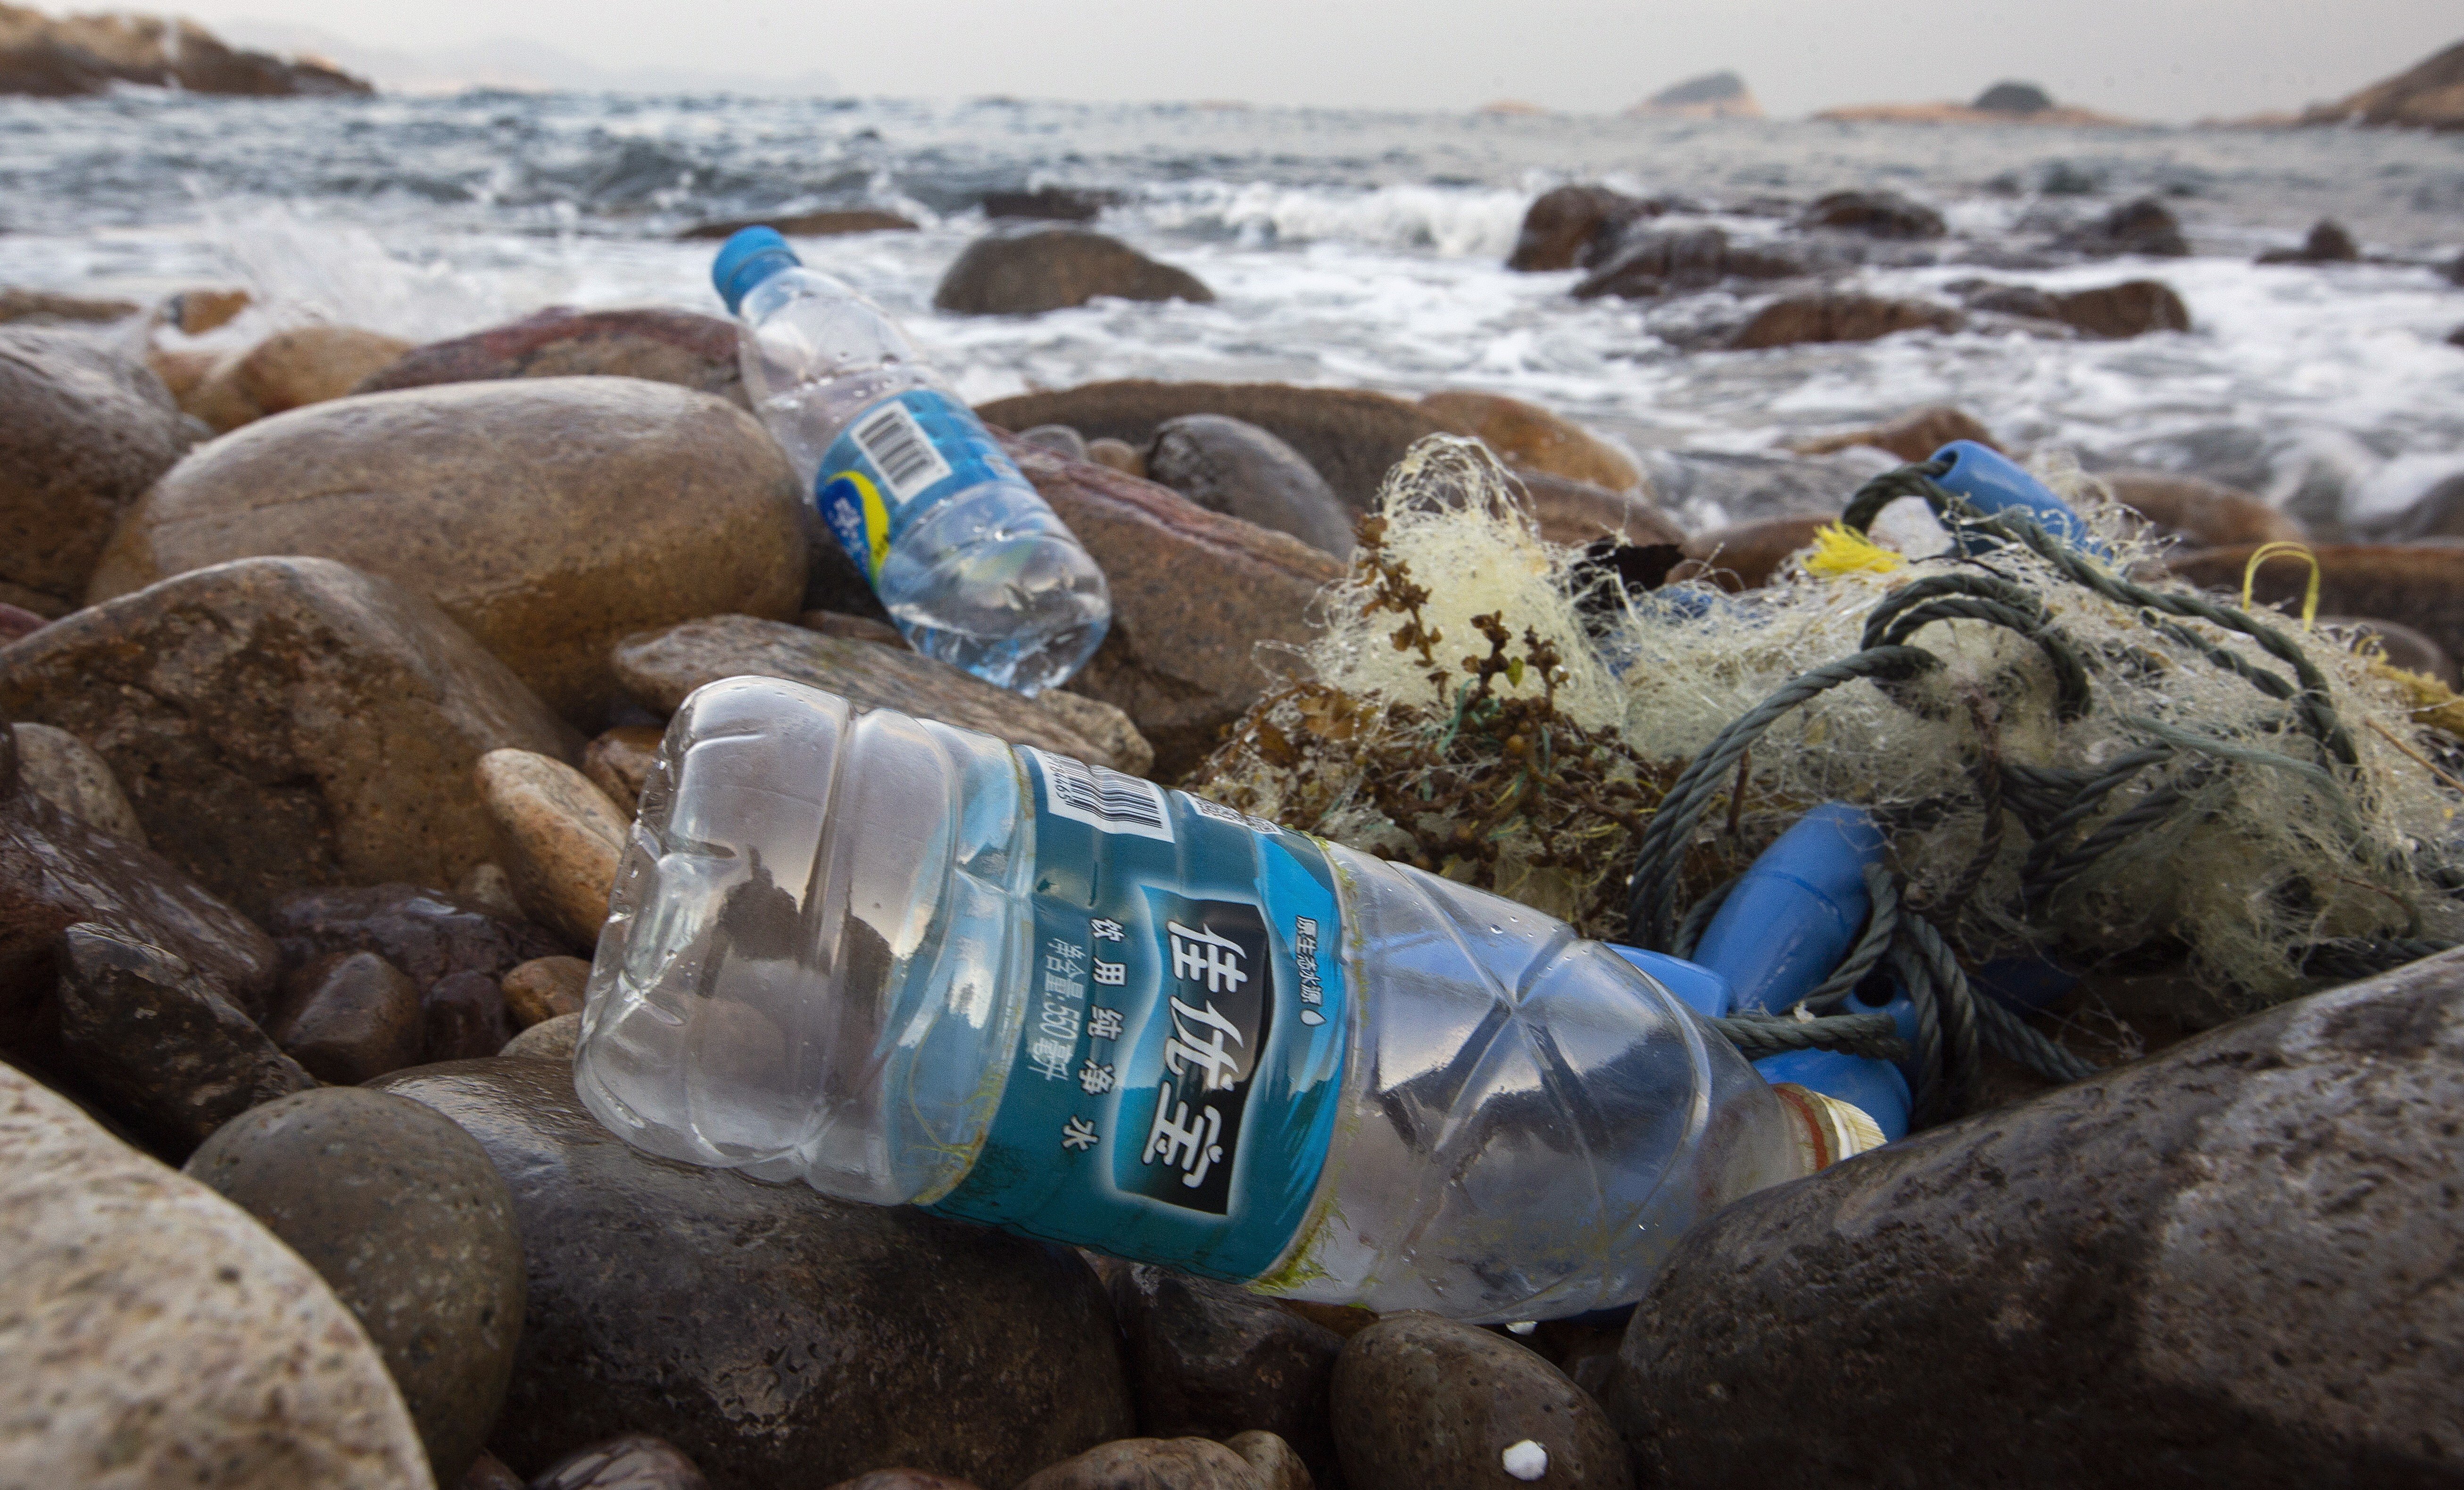 Discarded plastic water bottles are washed up on a beach in Lung Ha Wan, Clear Water Bay, Hong Kong, in December 2018. Photo: EPA-EFE